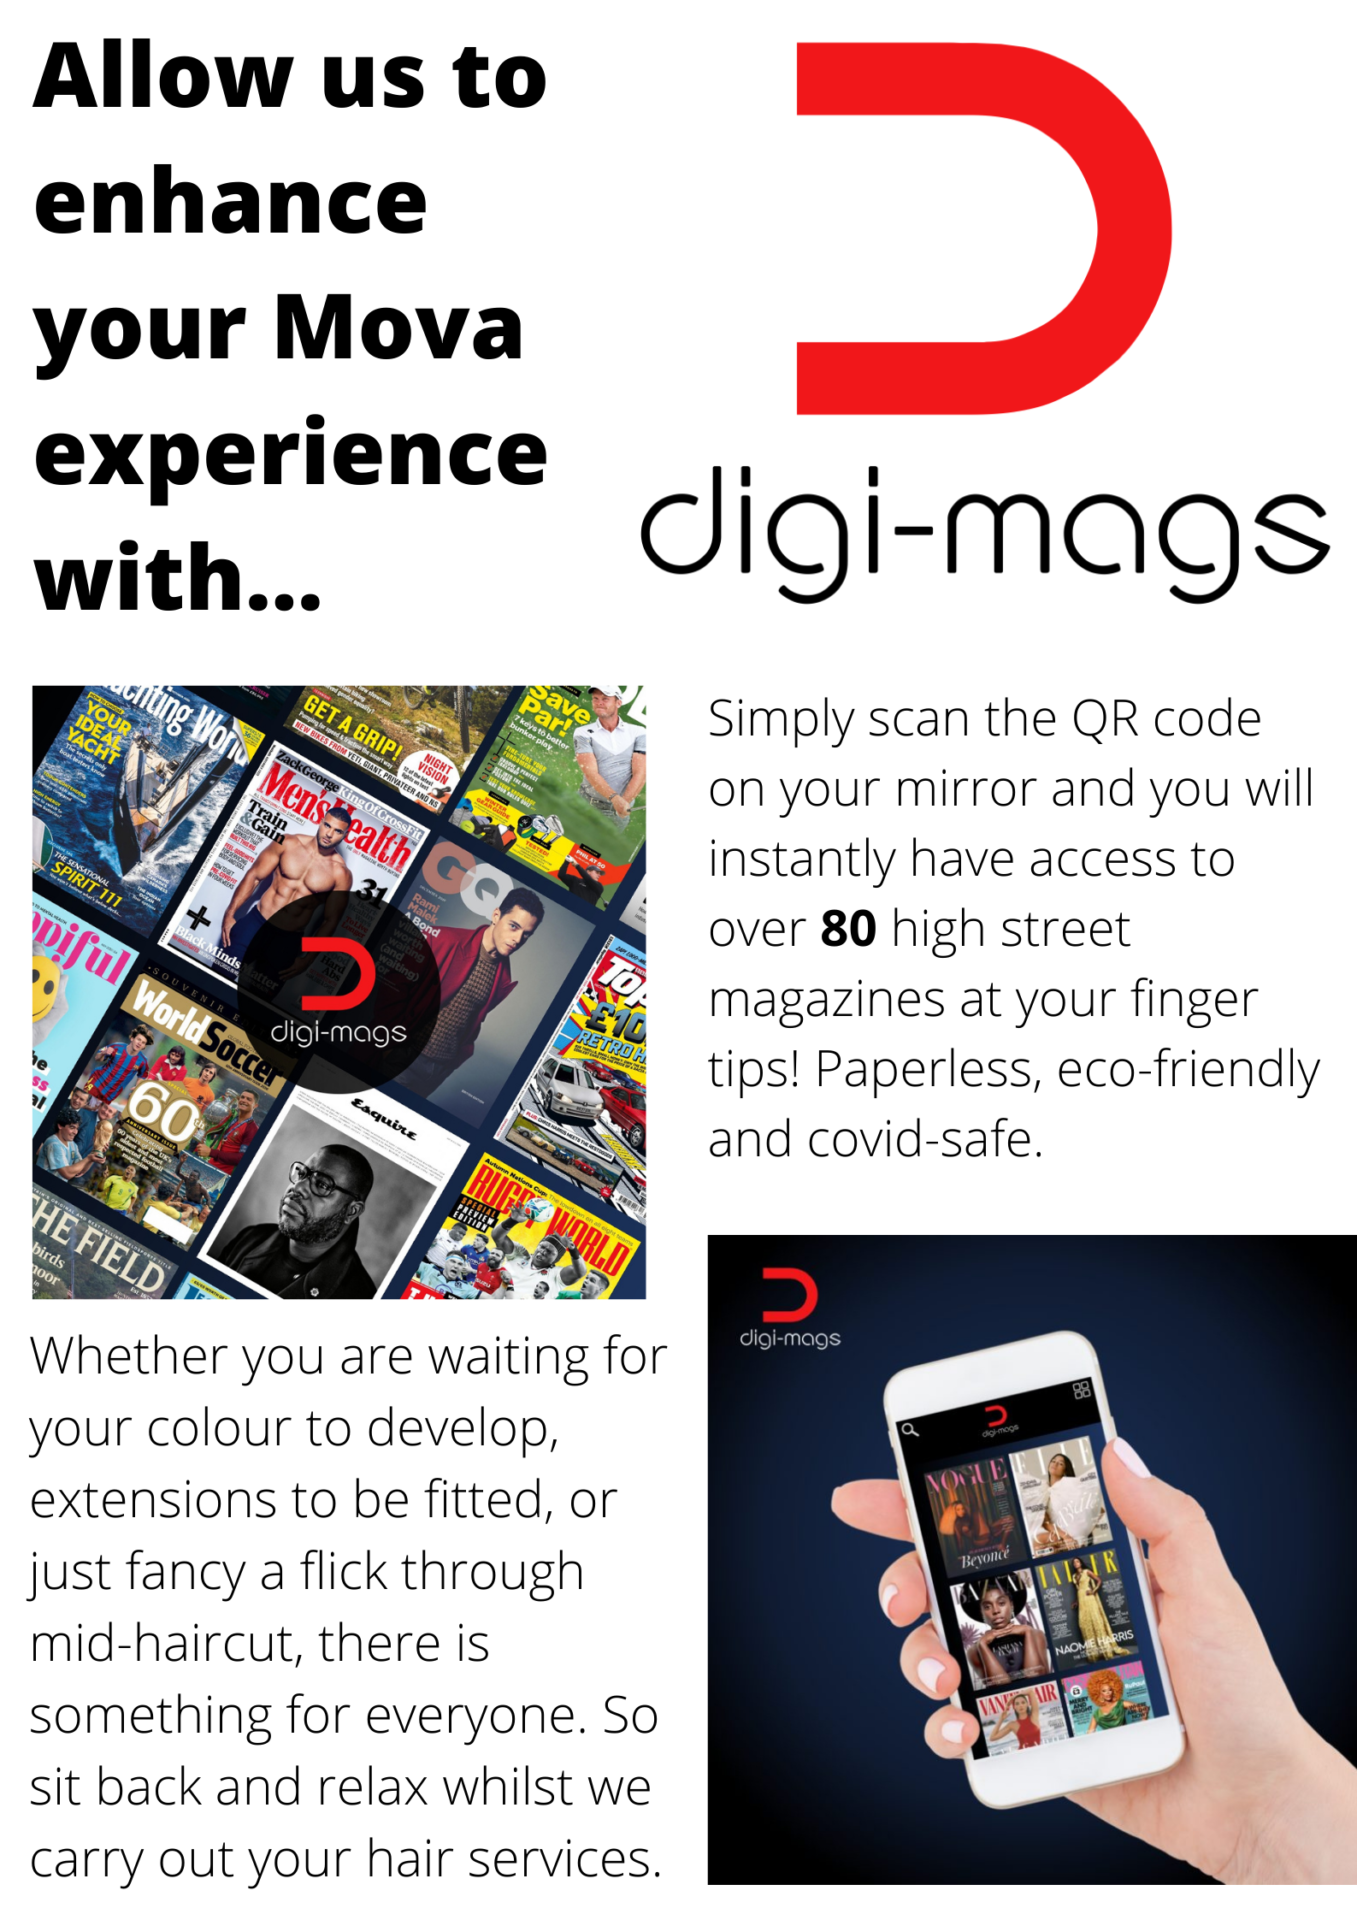 Allow us to enhance your Mova experience with DIGI MAGS